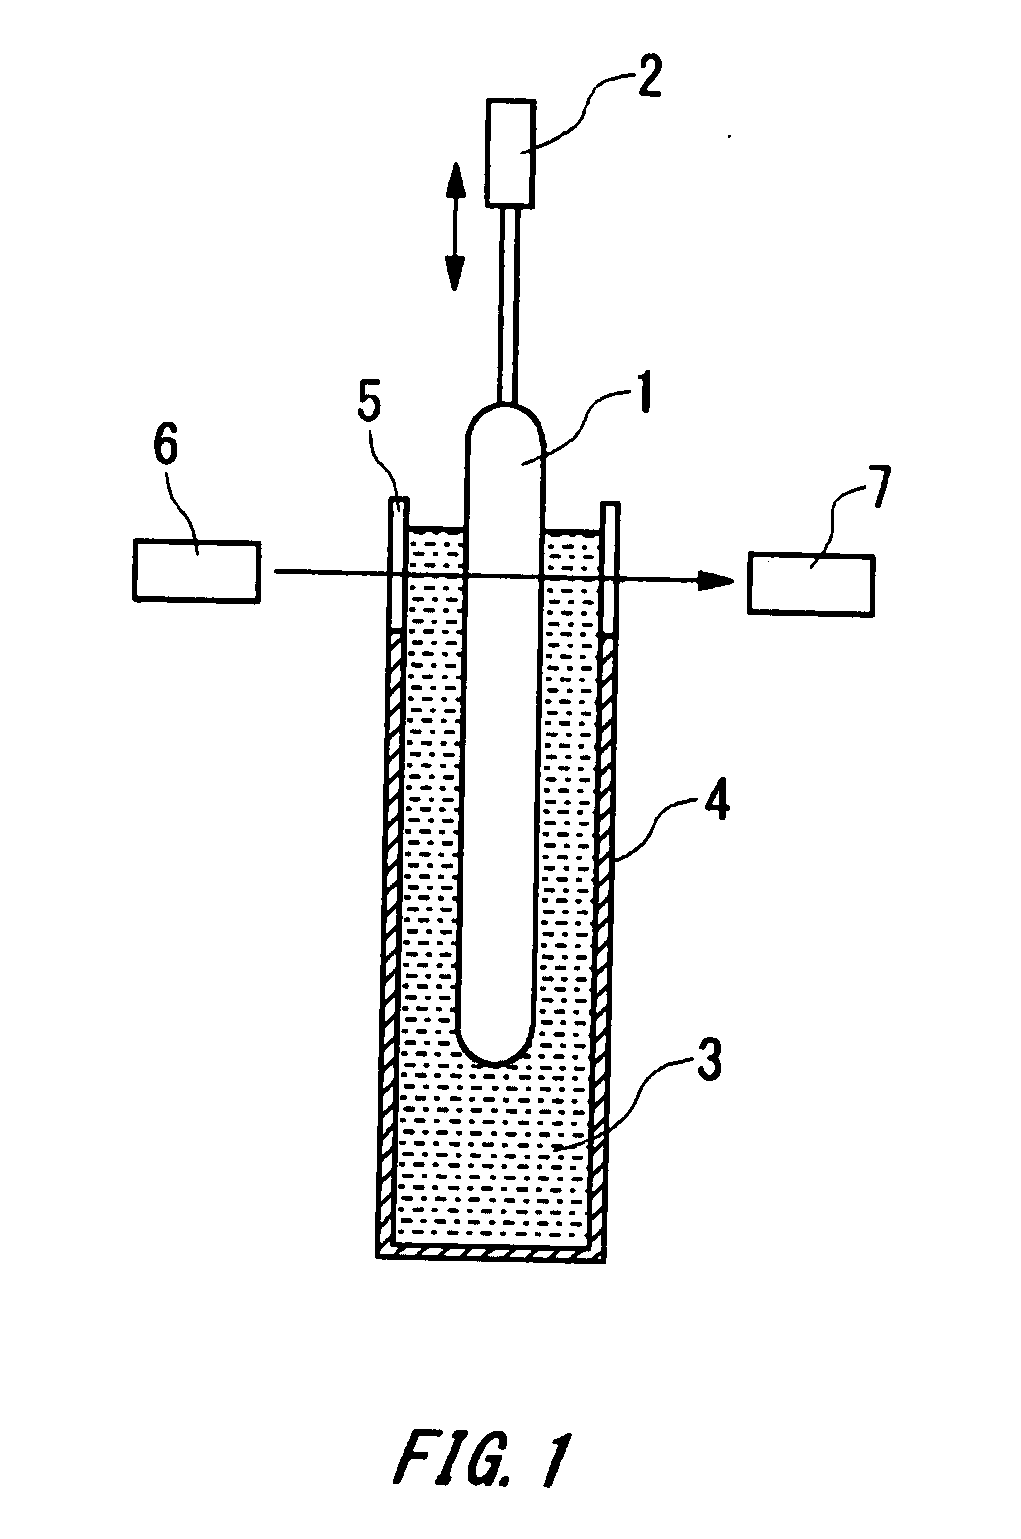 Method for measuring non-circularity at core portion of optical fiber parent material